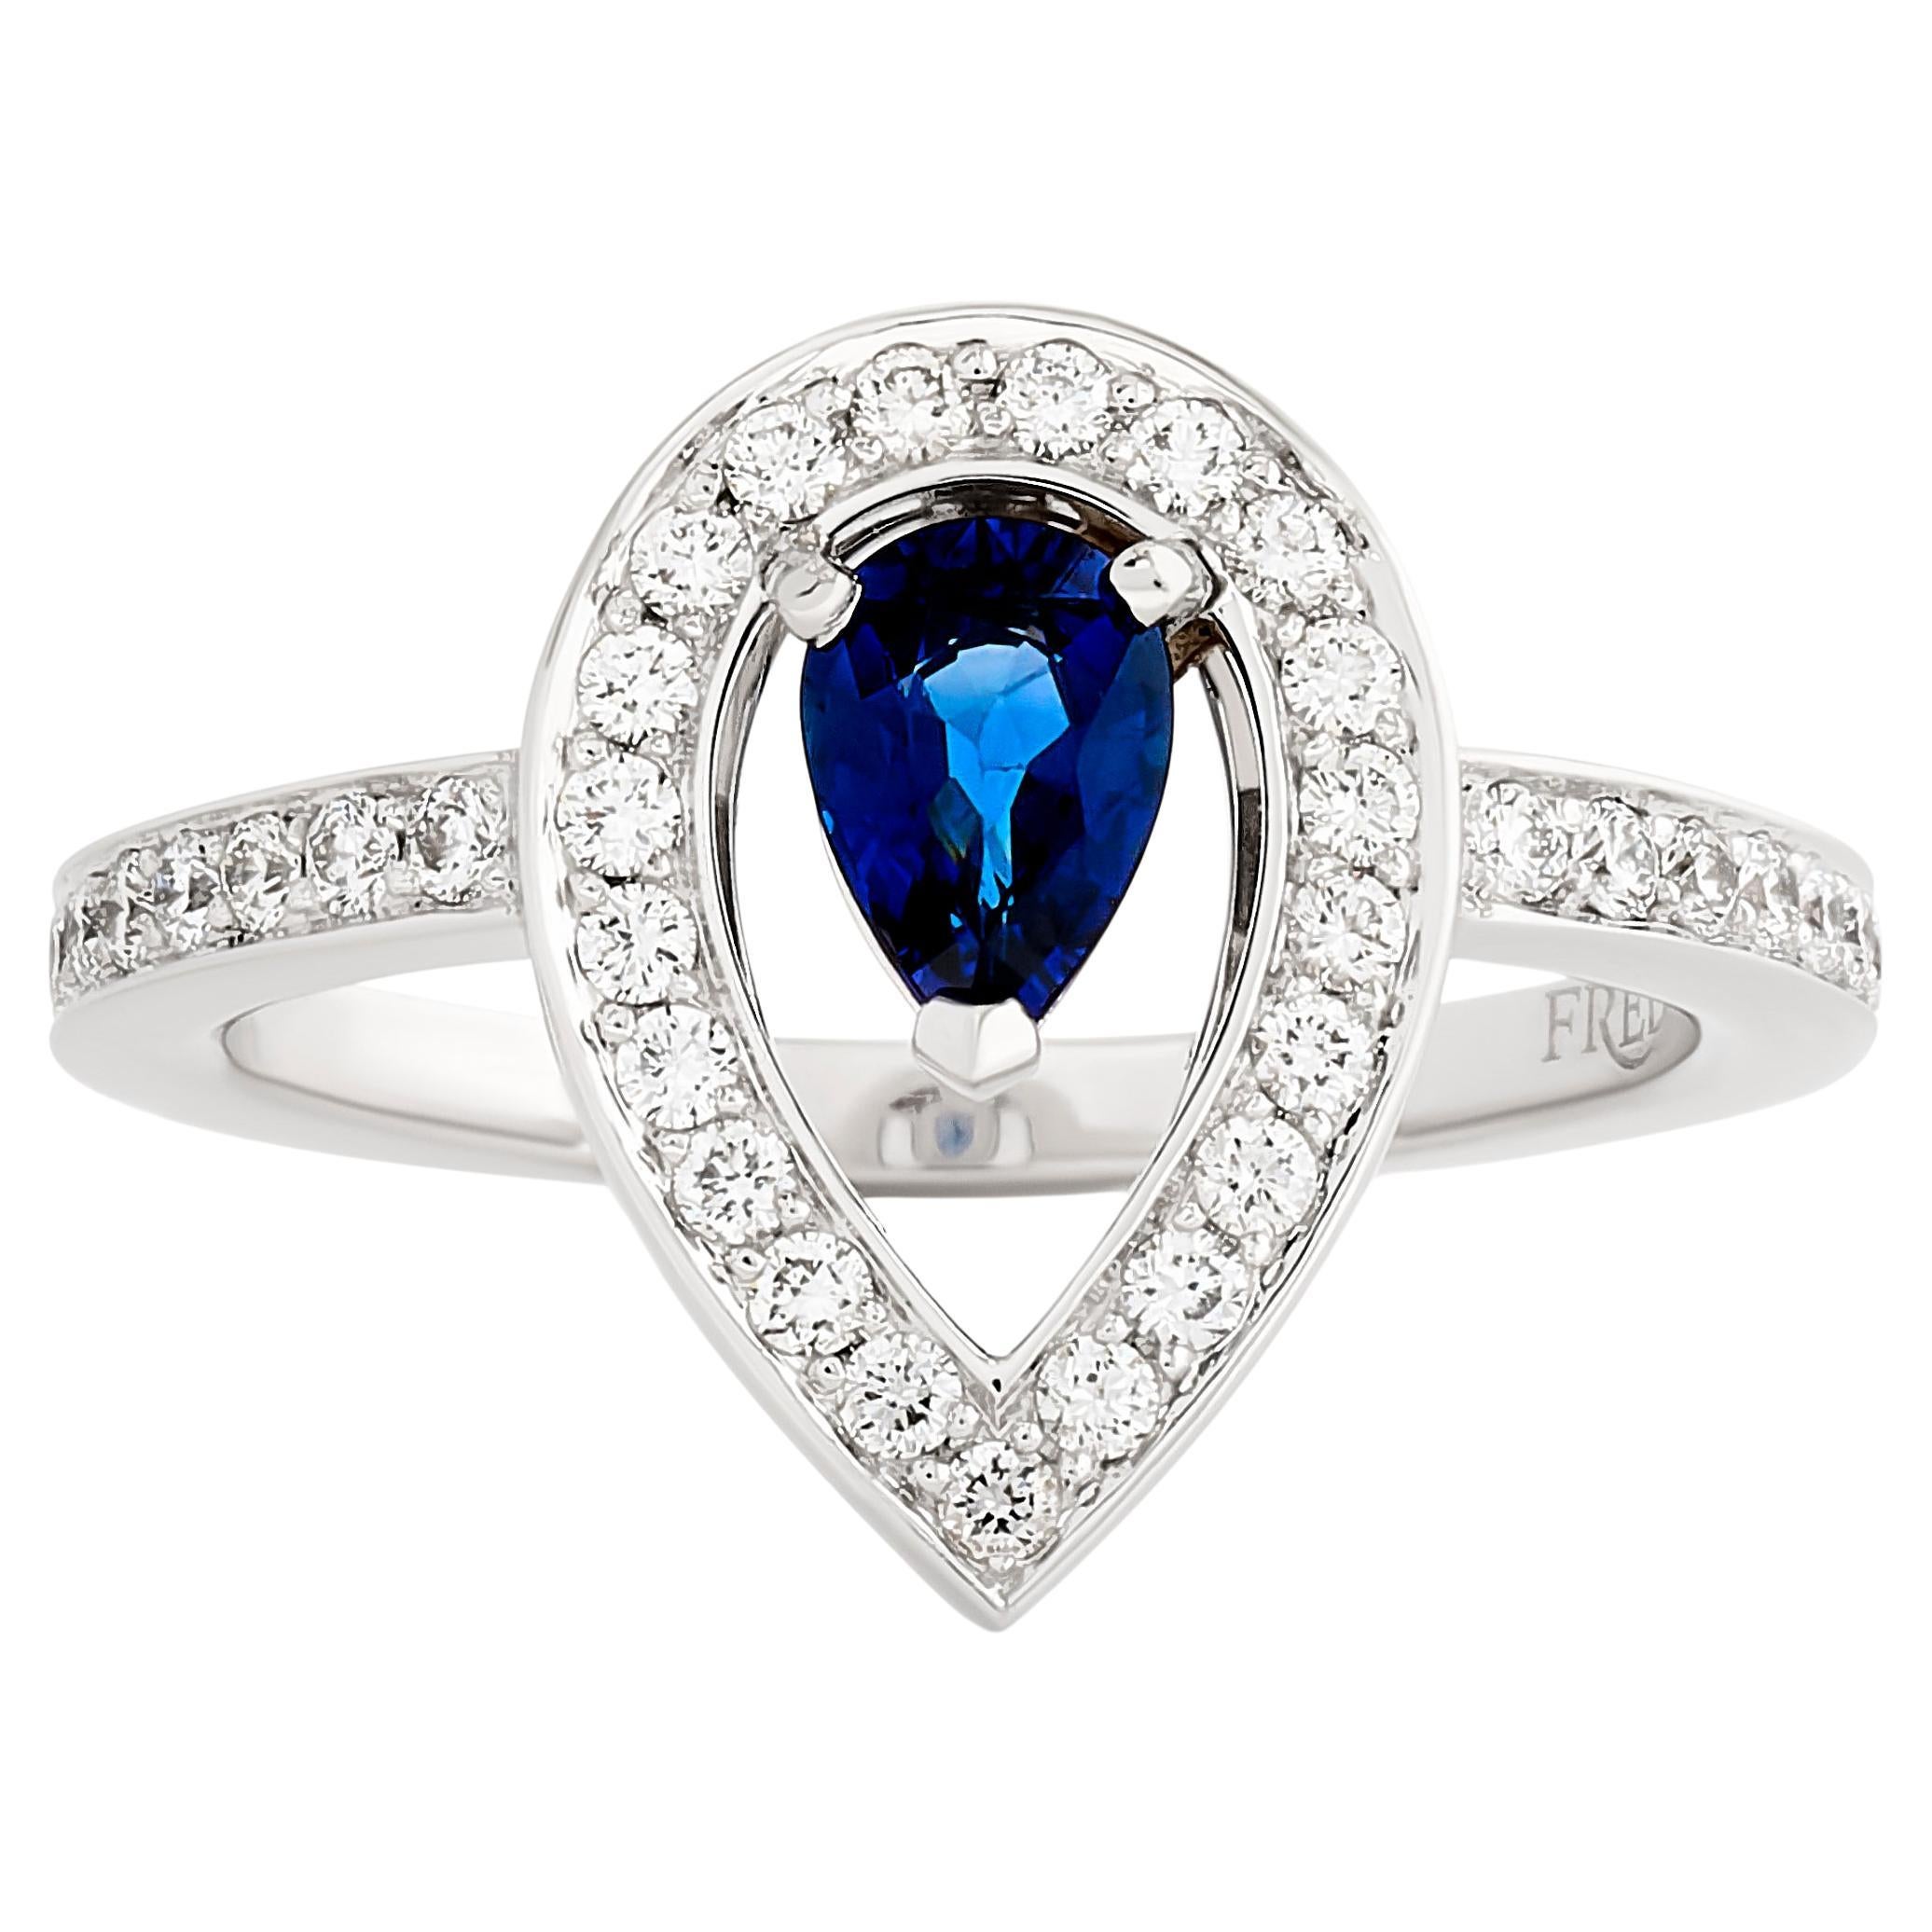 Fred of Paris Pear Sapphire and Diamond Lovelight Halo Style Ring in Platinum For Sale